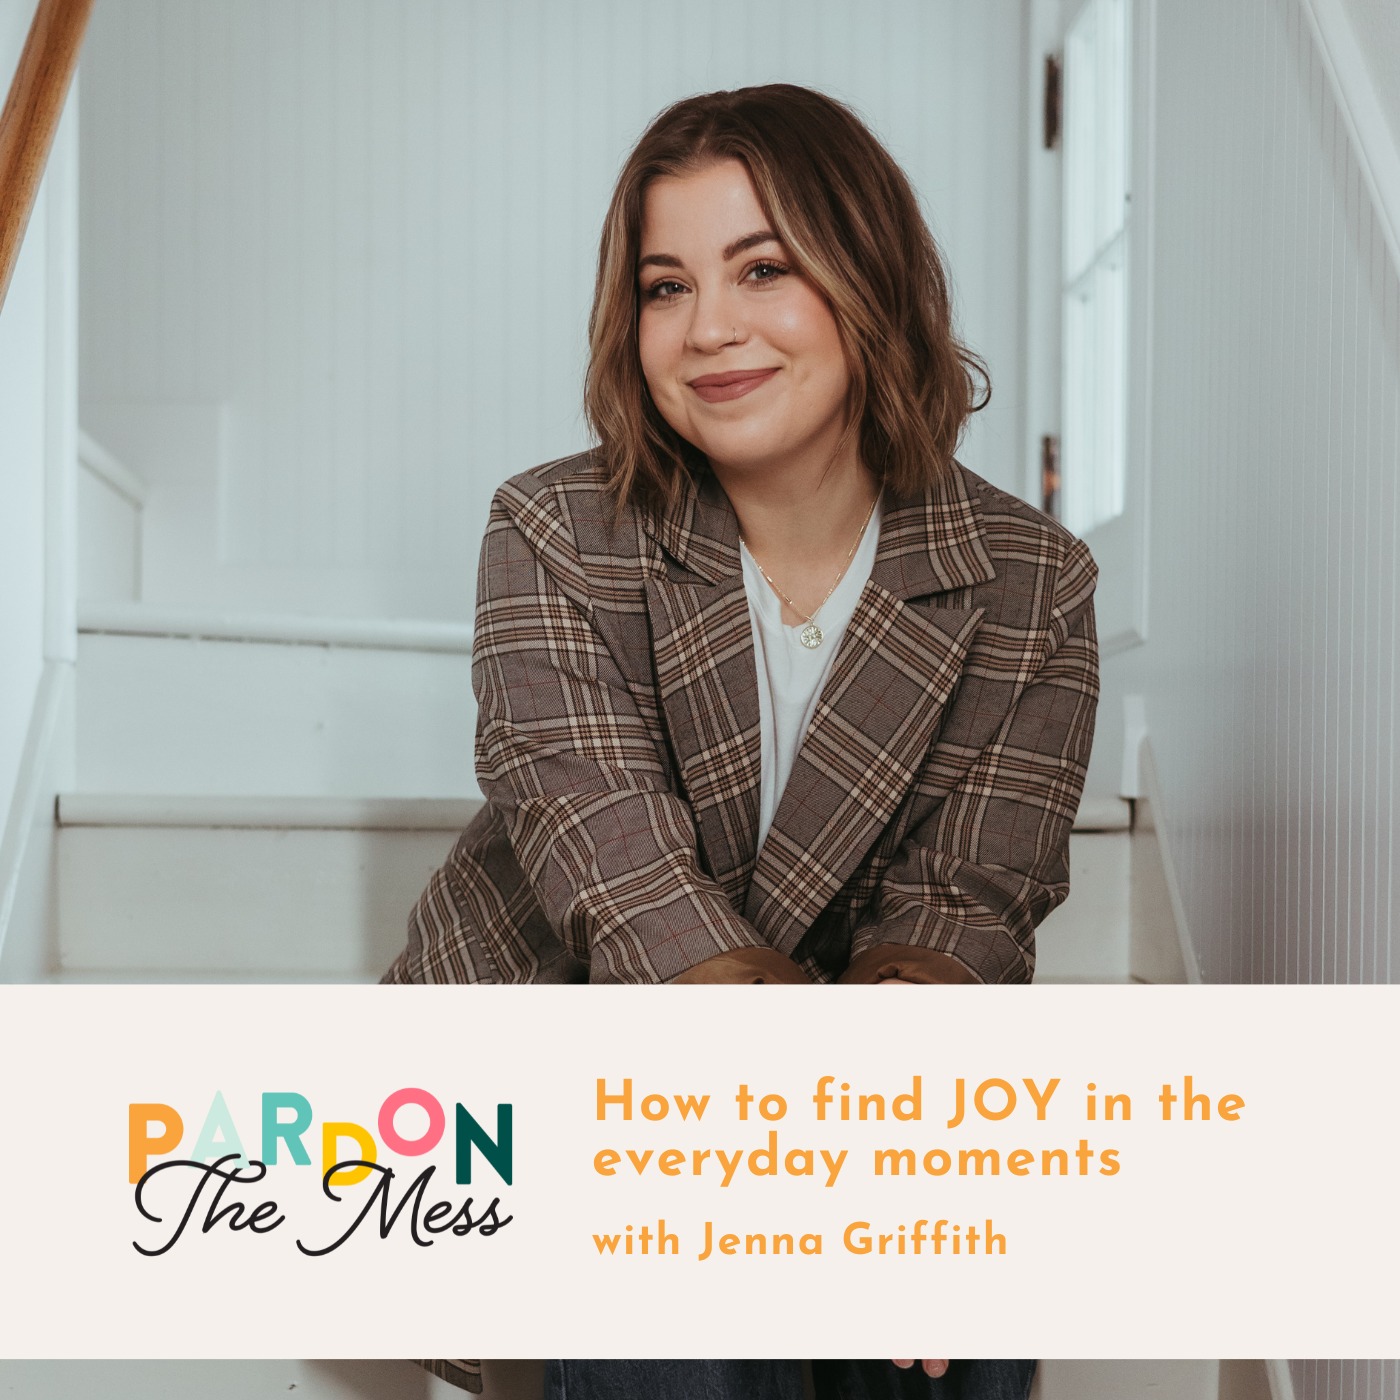 How to find JOY in the everyday moments with Jenna Griffith